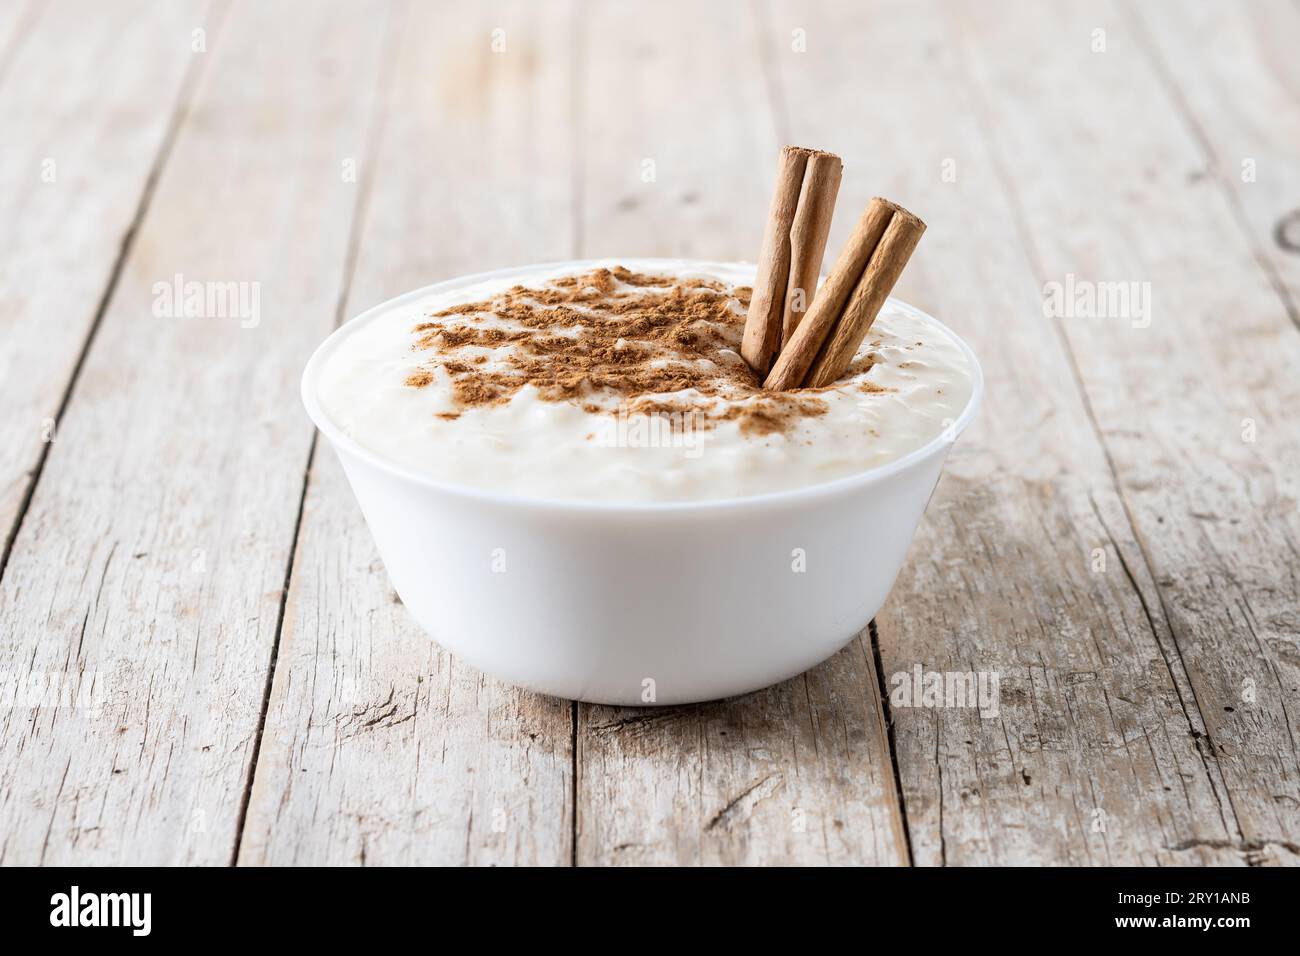 Arroz con leche. Rice pudding with cinnamon in bowl on wooden table Stock Photo